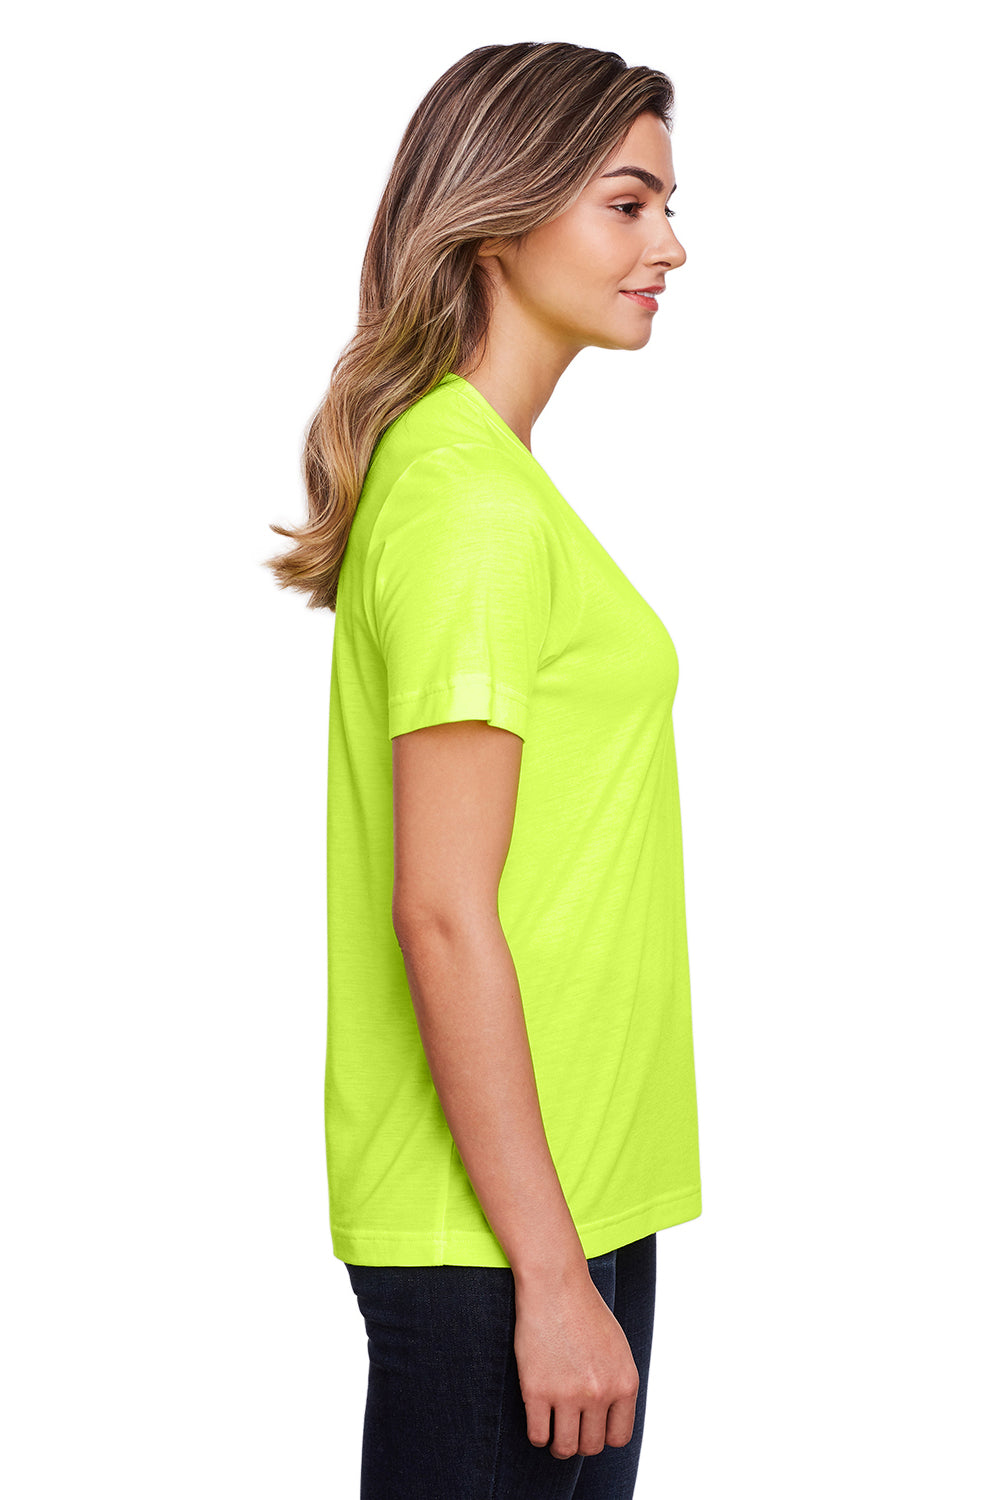 Core 365 CE111W Womens Fusion ChromaSoft Performance Moisture Wicking Short Sleeve Scoop Neck T-Shirt Safety Yellow Side